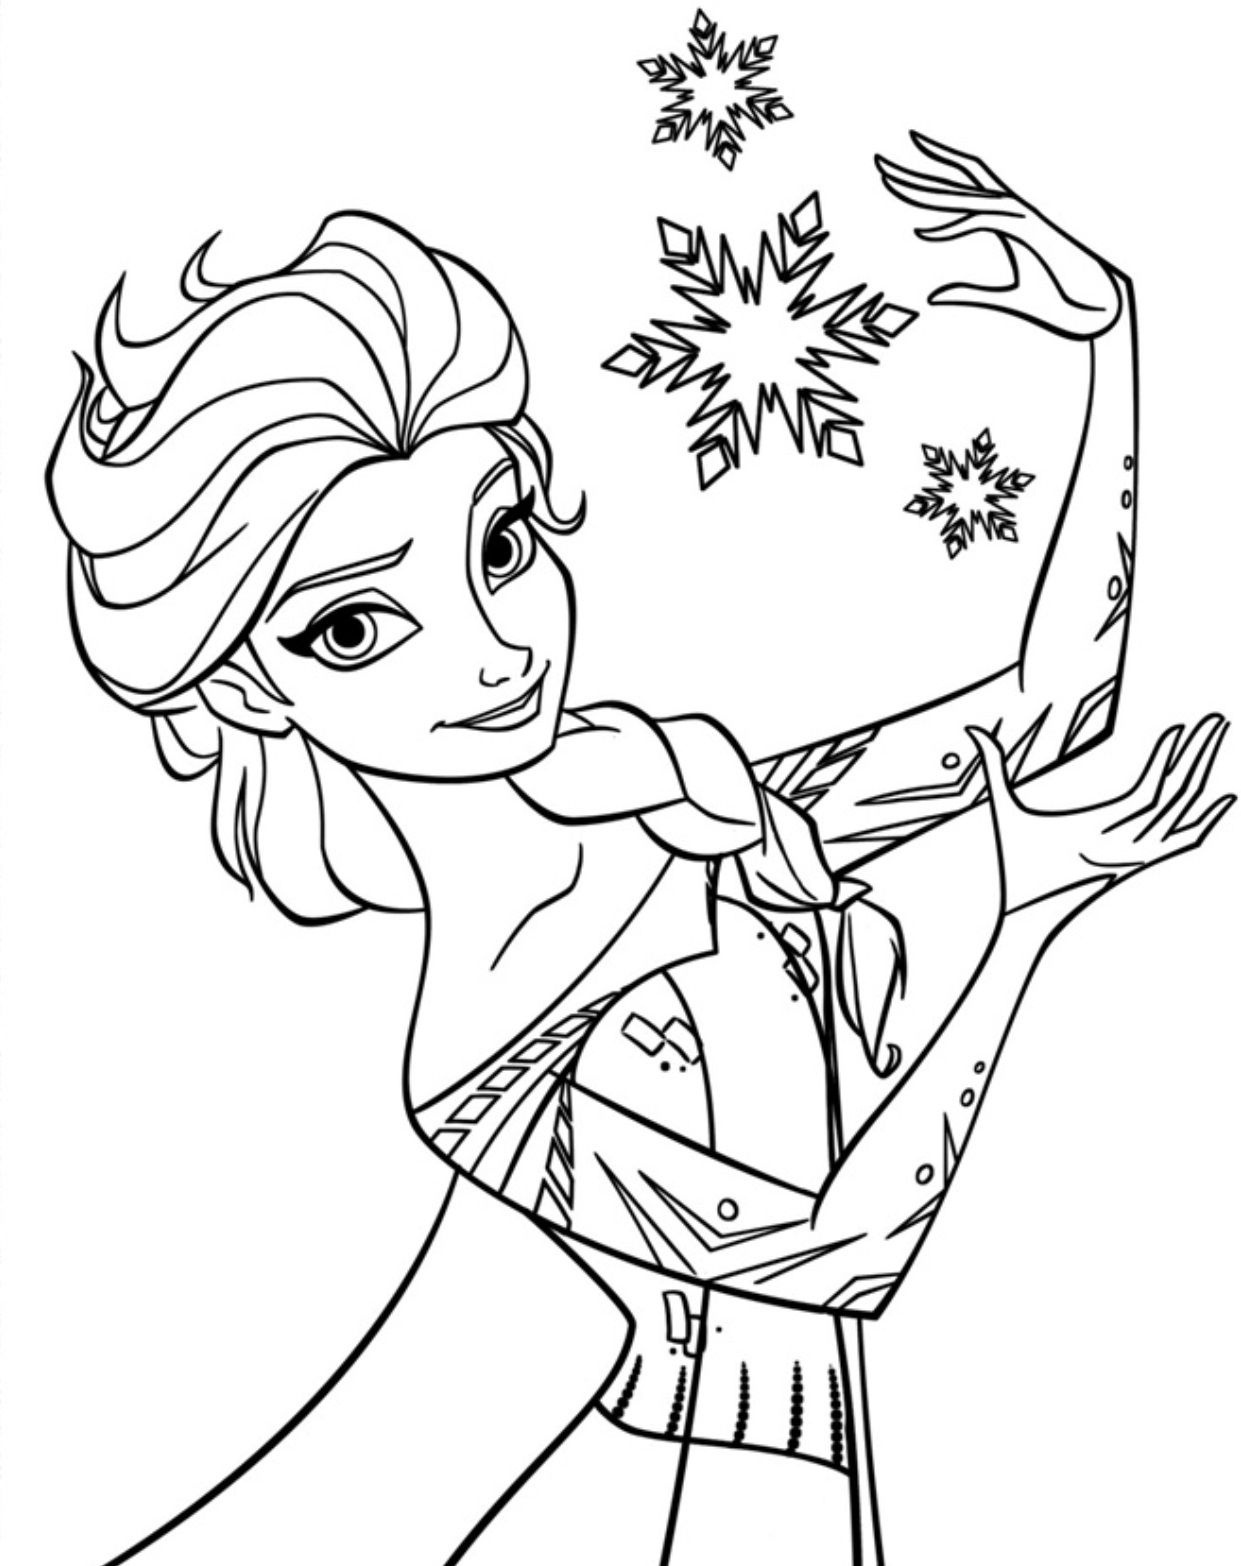 Free Printable Elsa Coloring Pages For Kids | Elsa | Frozen Coloring - Free Printable Frozen Coloring Pages